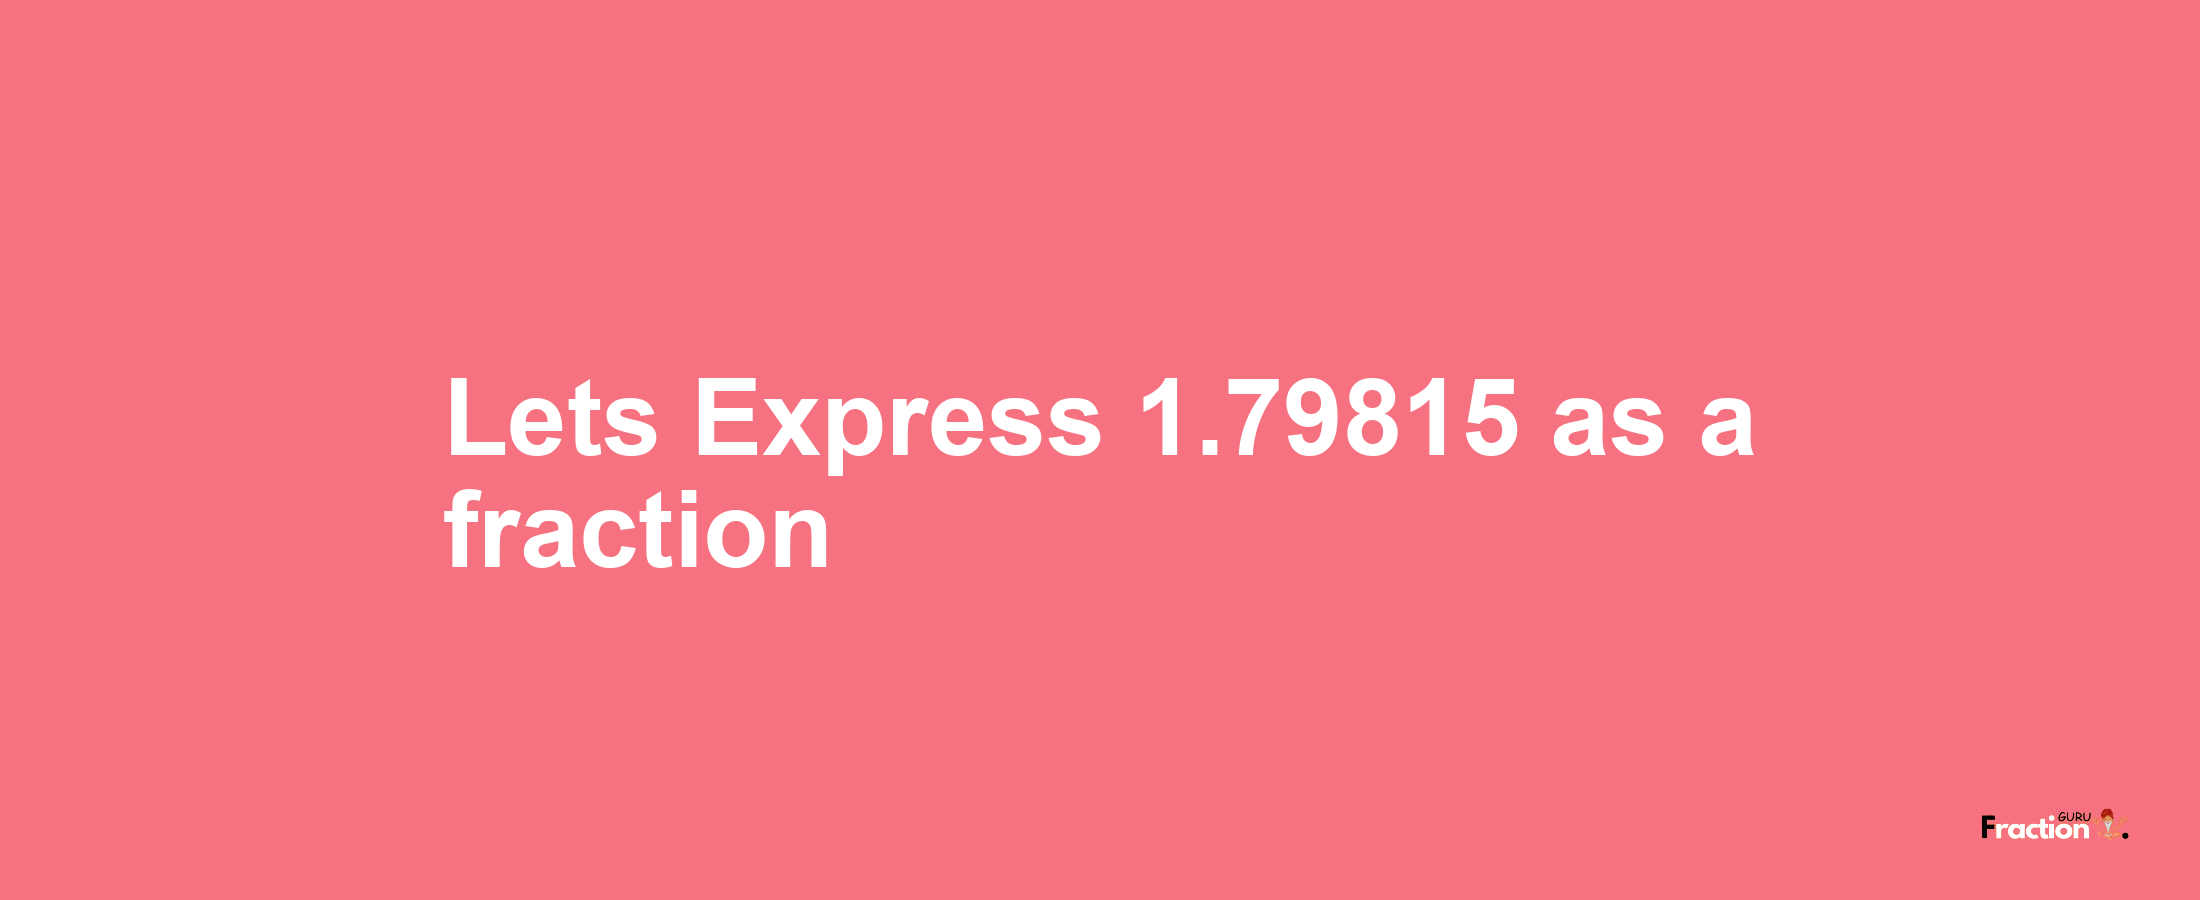 Lets Express 1.79815 as afraction